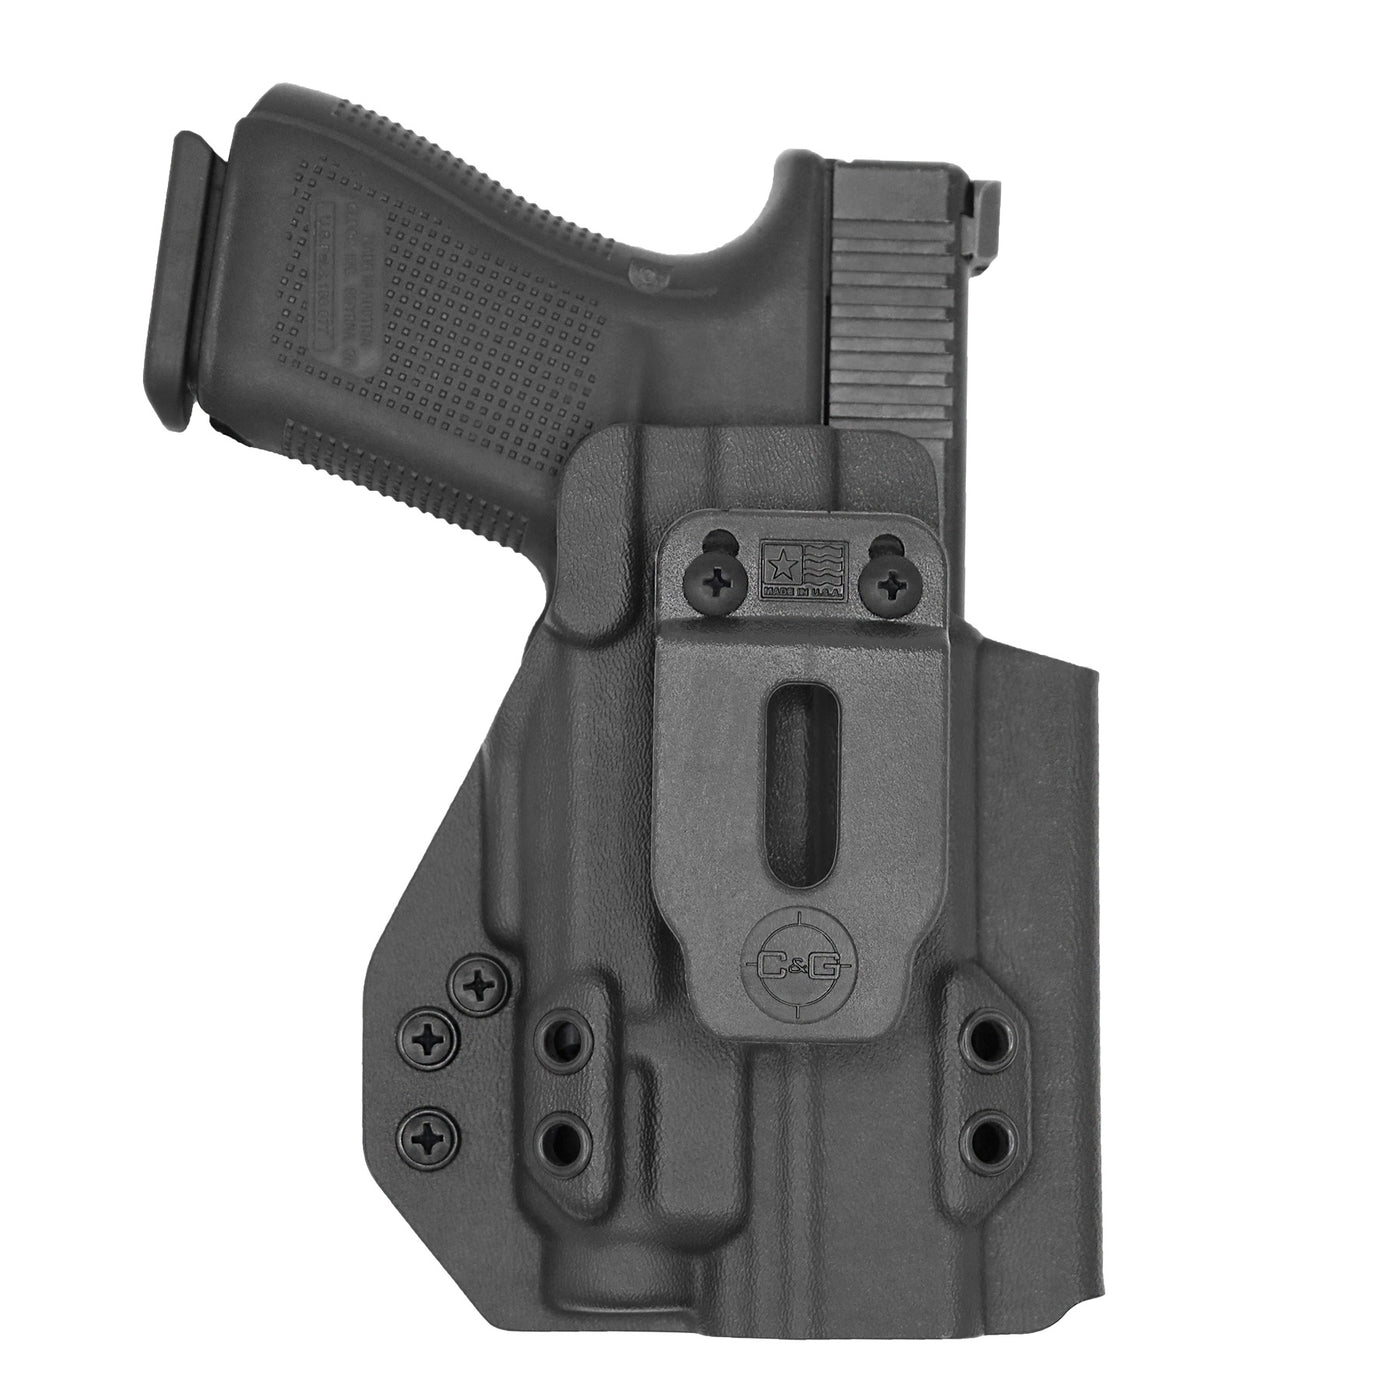 C&G Holsters custom IWB Tactical Glock 29/30 streamlight TLR7/a in holstered position